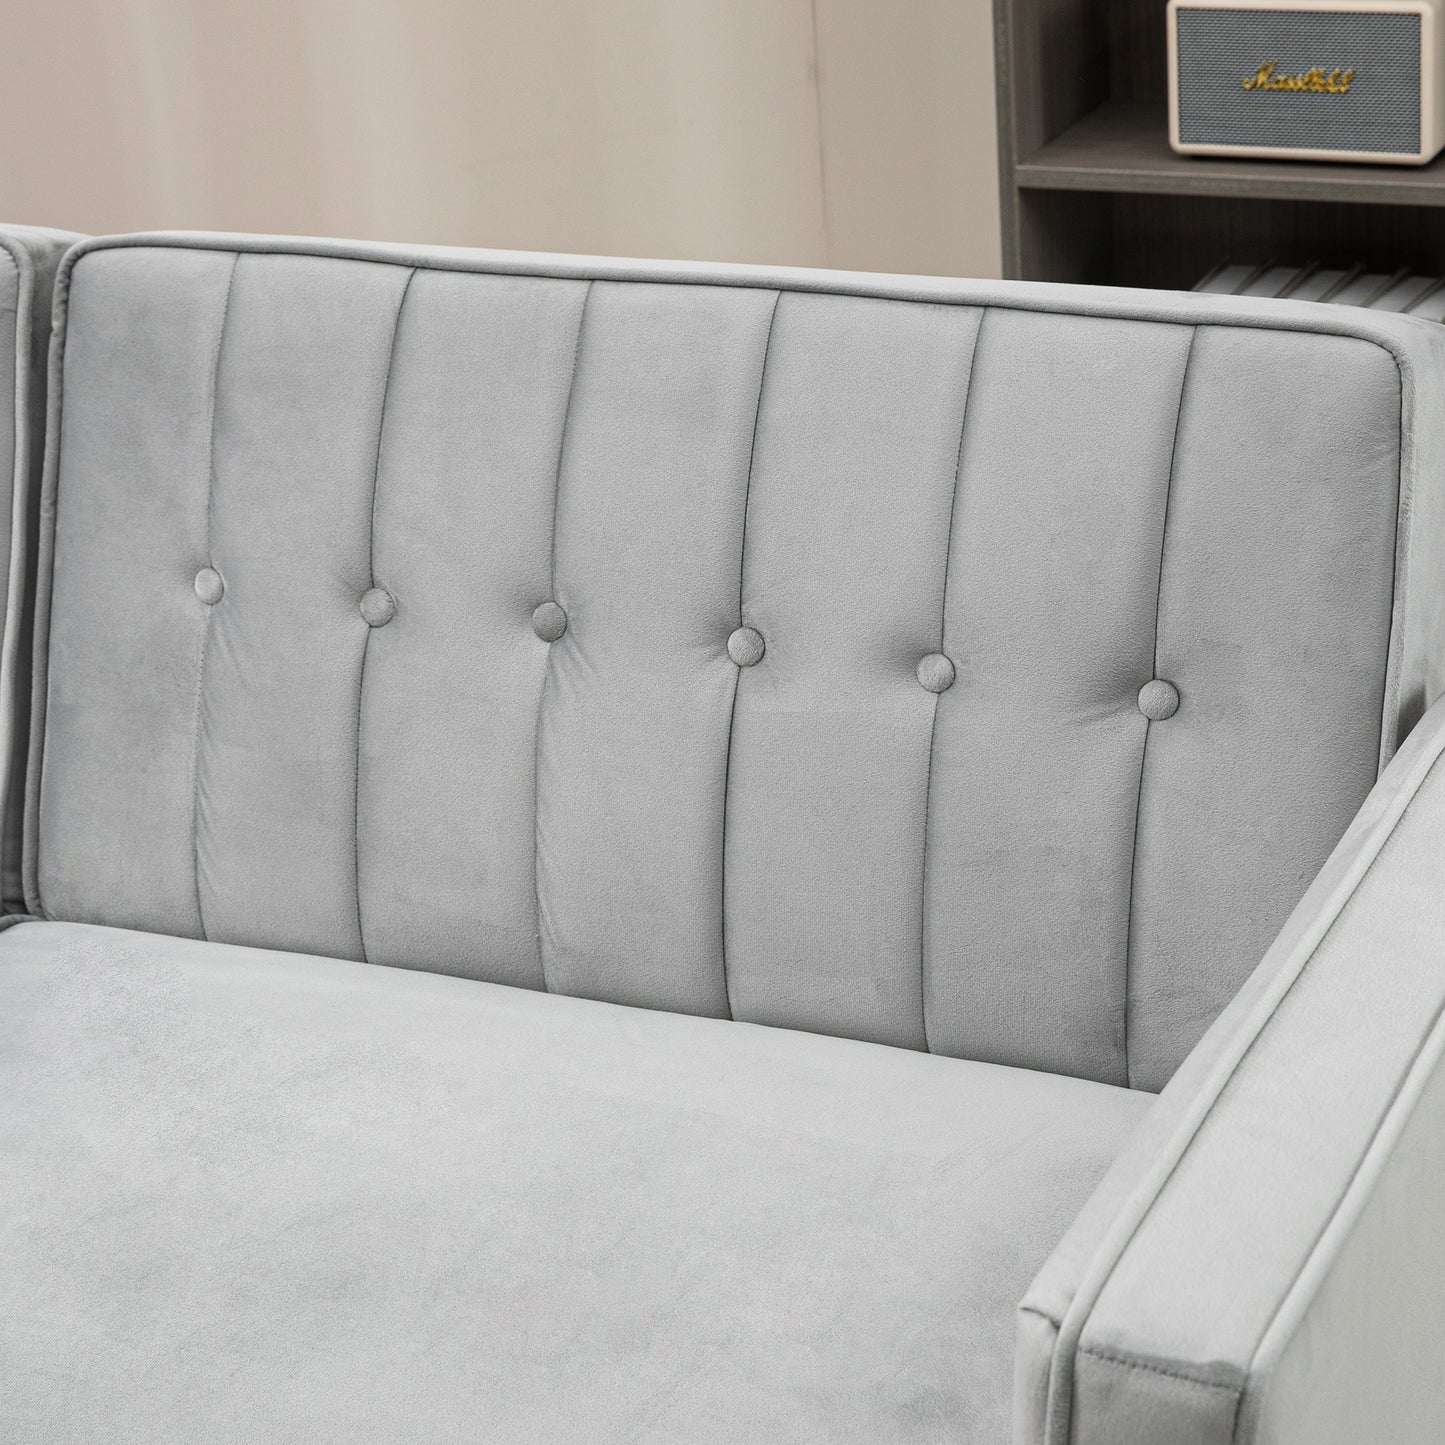 HOMCOM Modern Convertible Sofa Futon Velvet-Touch Tufted Couch Compact Loveseat with Adjustable Split Back, Light Grey